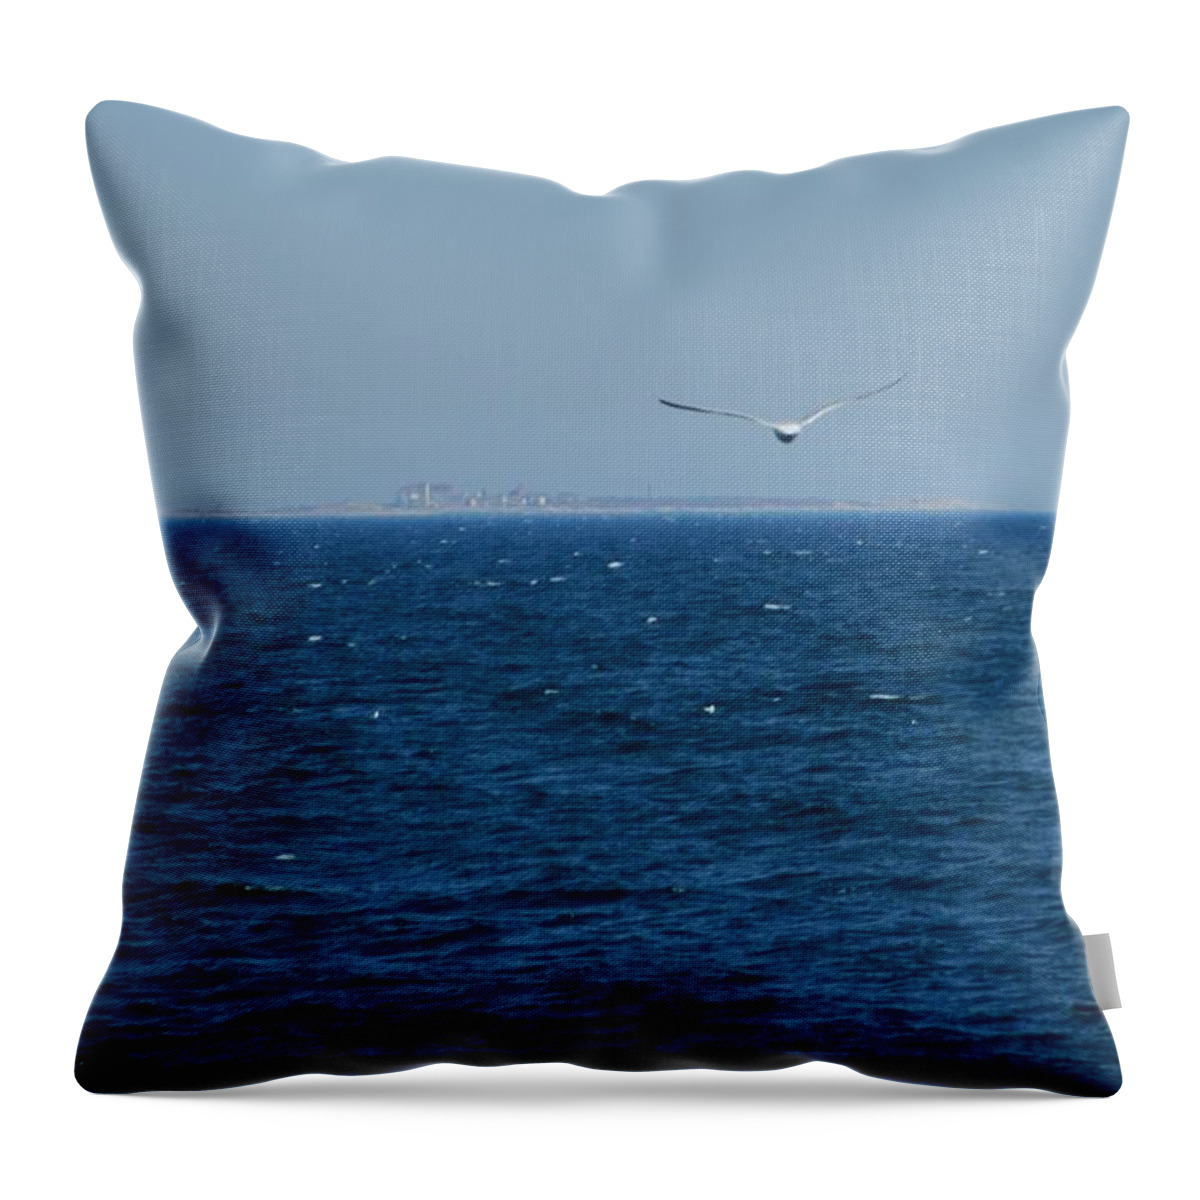 Photography Throw Pillow featuring the digital art Return to the Isle of Shoals by Barbara S Nickerson